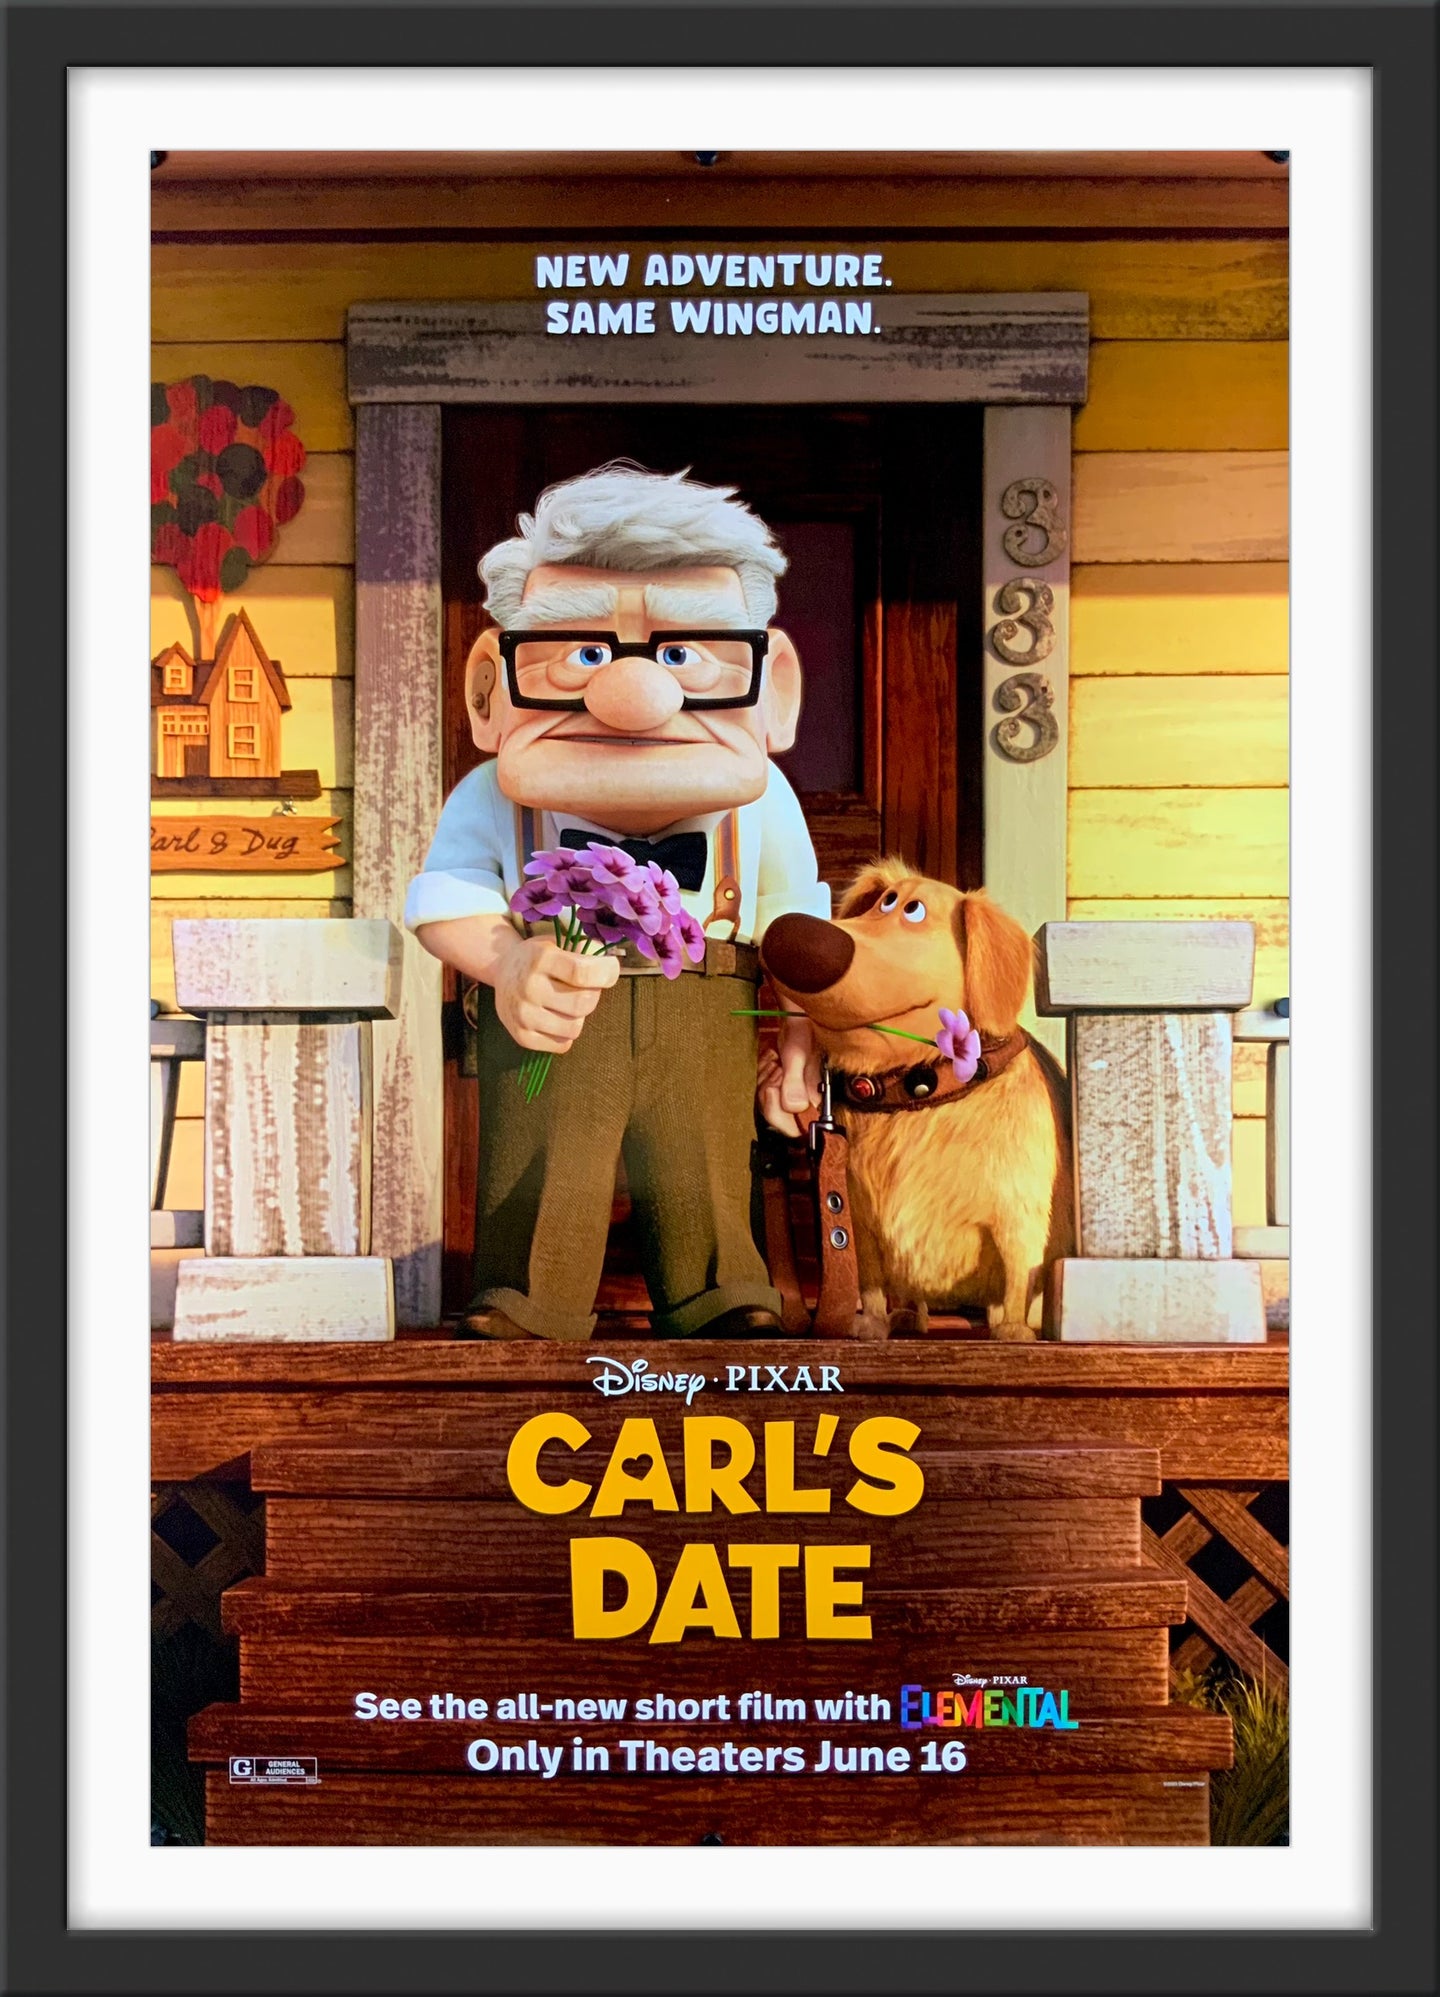 An original movie poster for the Disney and Pixar short film Carl's Date, based on the character created for the film UP